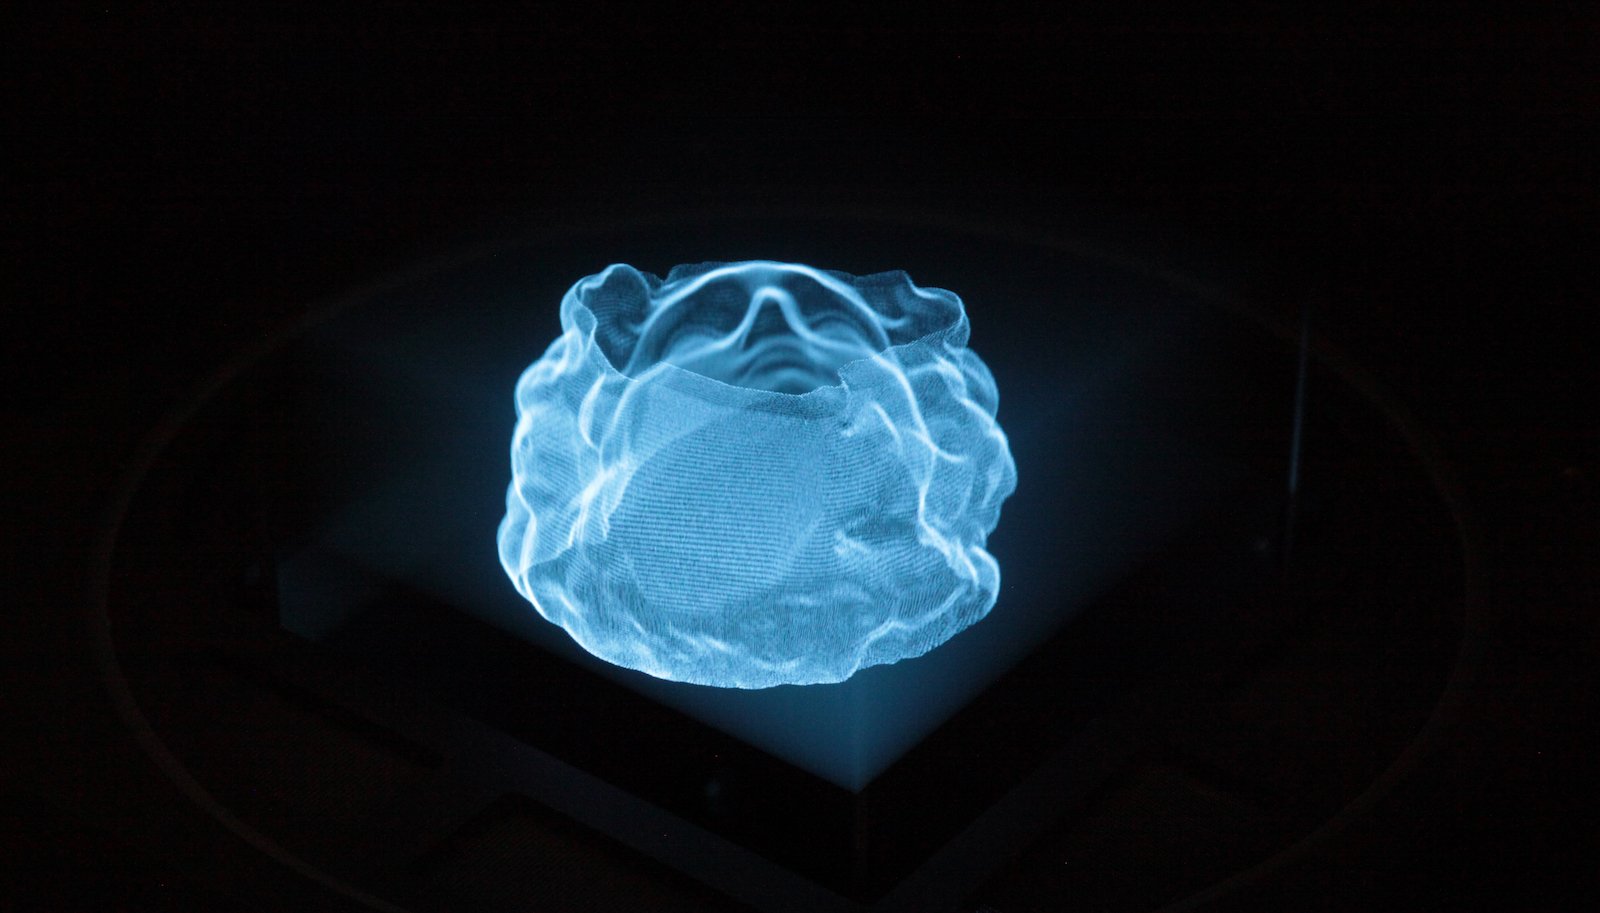 A holographic image of a head bust in blue against a black background